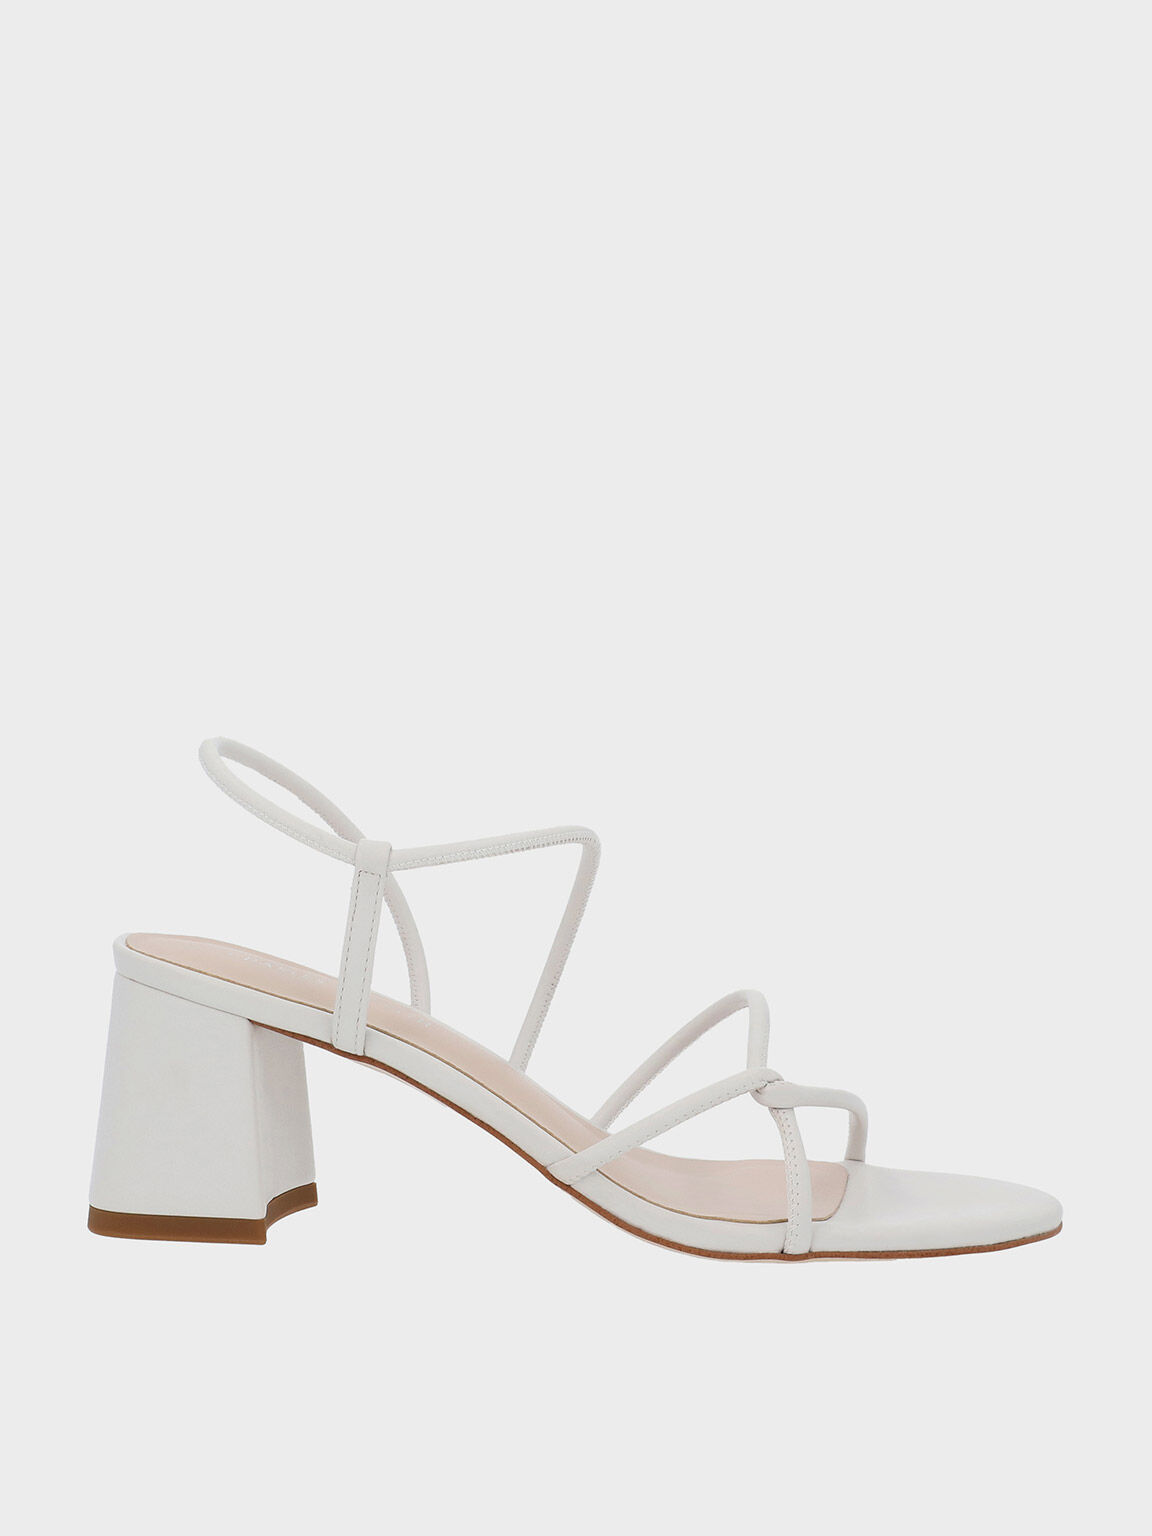 Charles & Keith - Floral Lucite Heel Sandals - Valiram Group